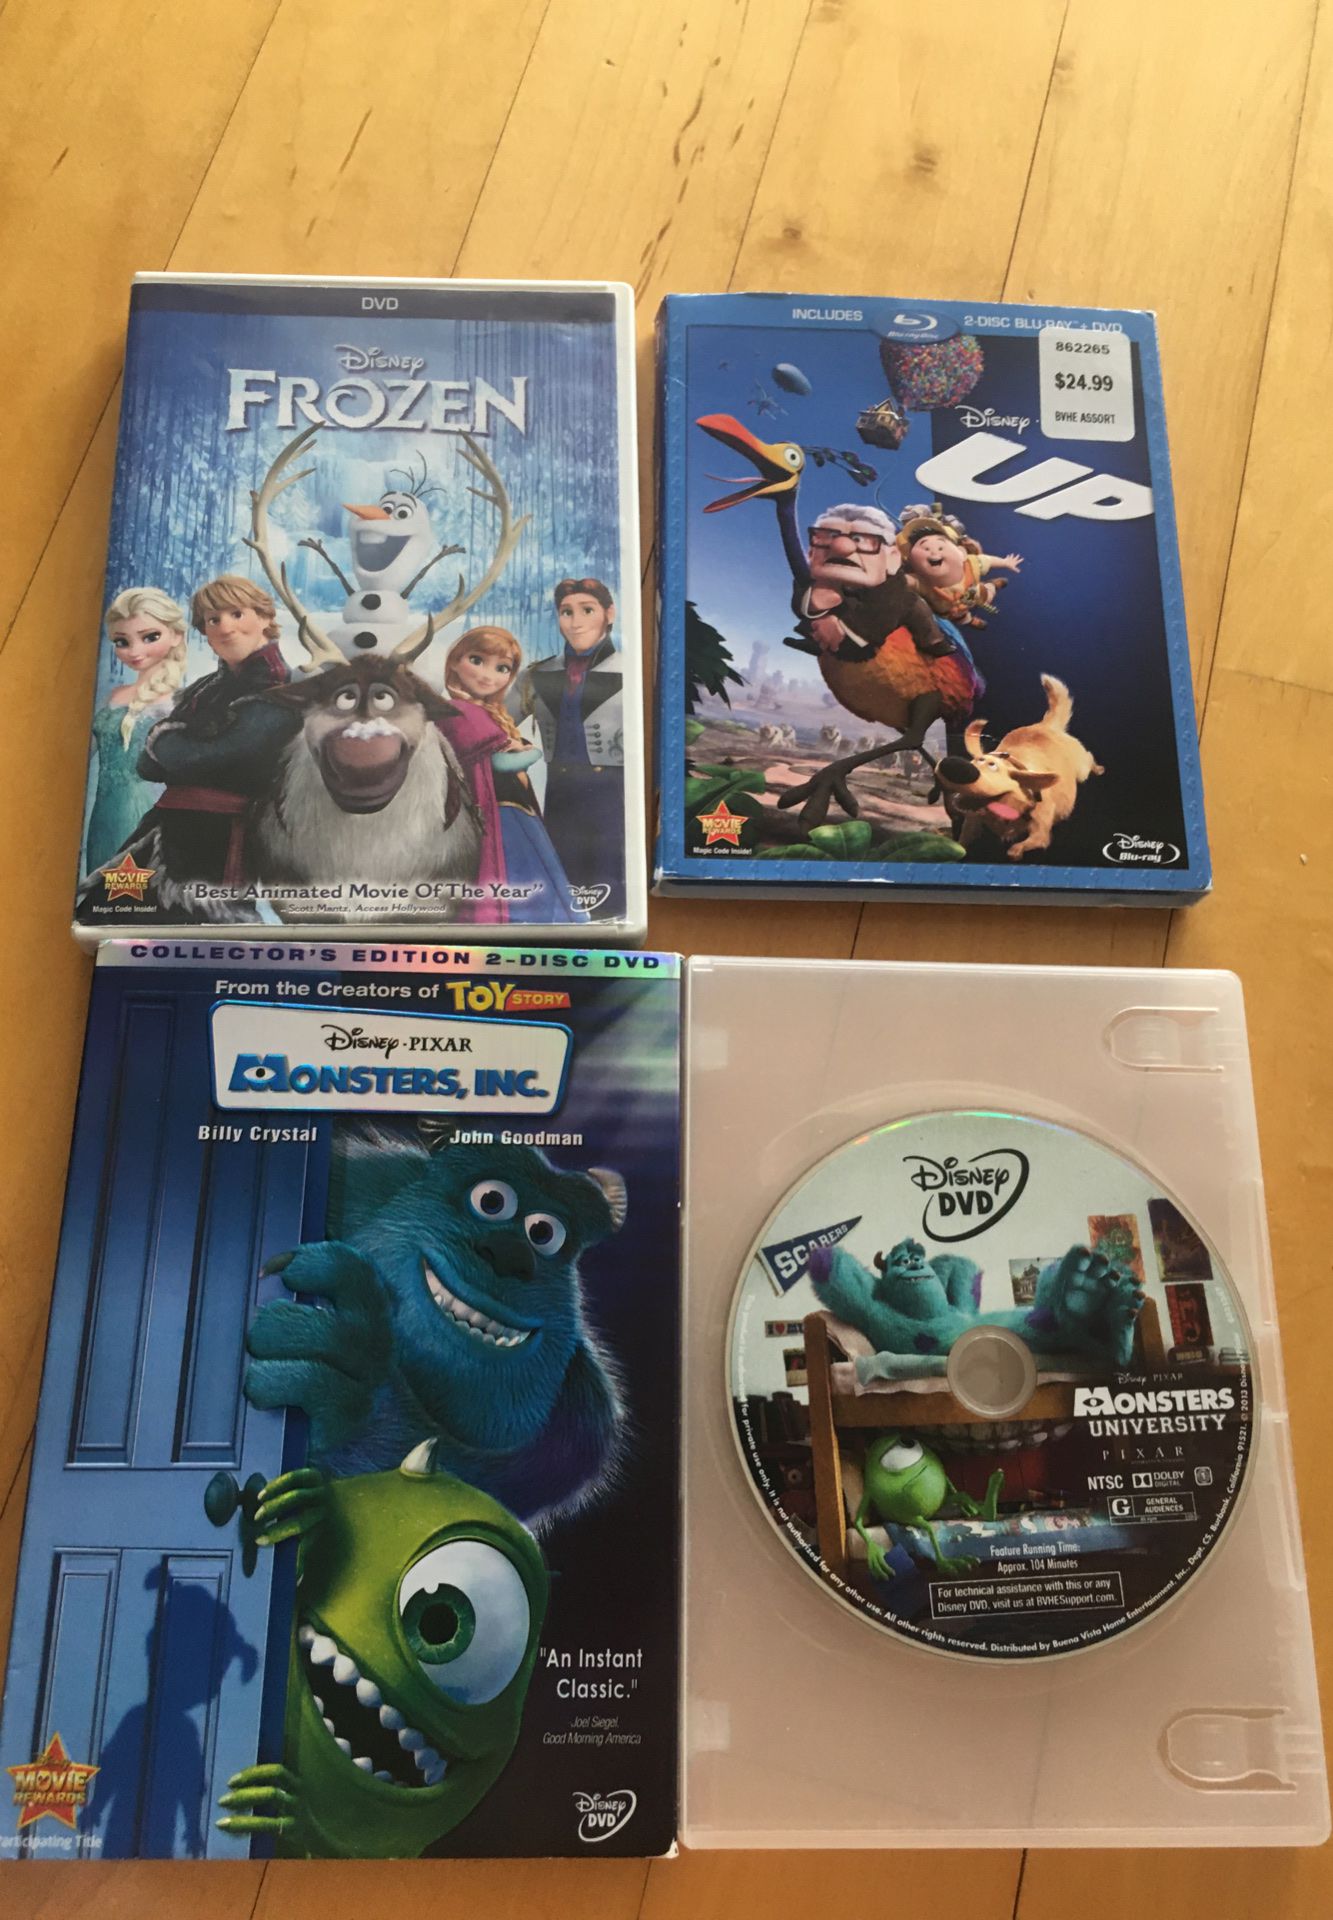 DVD of Up, Monsters Inc. , Monsters University and Frozen.